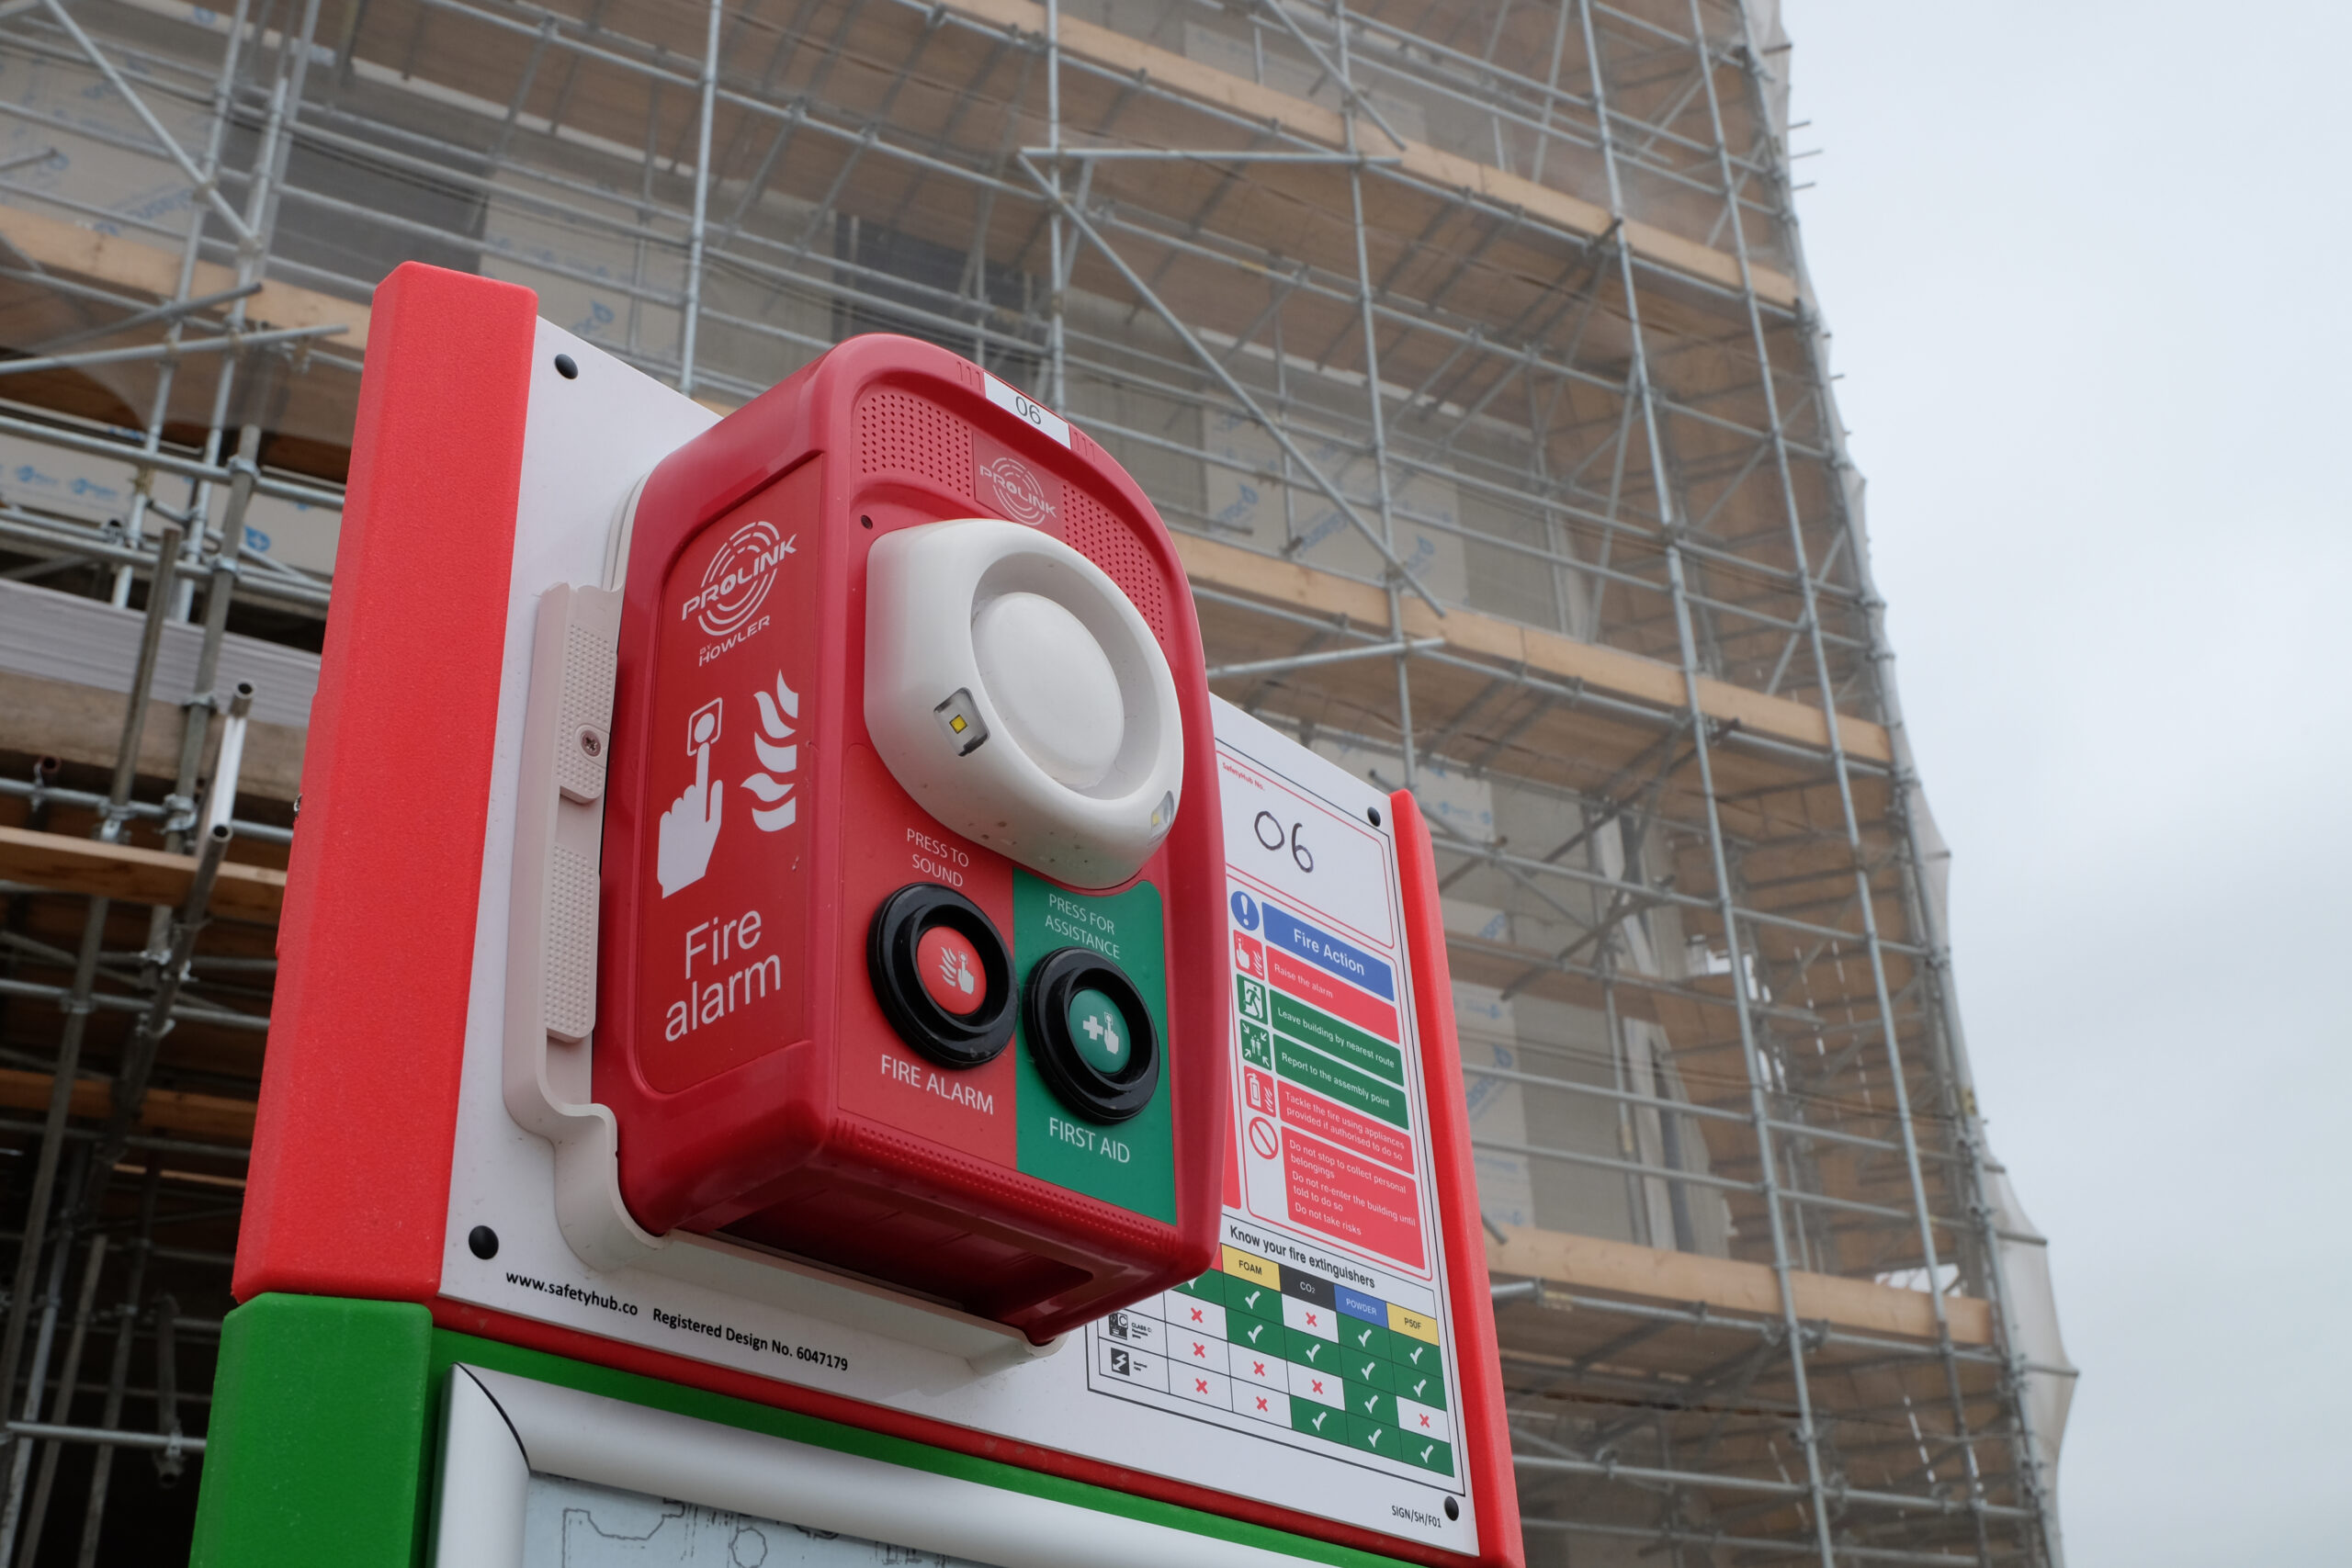 Wireless Fire Alarm On Construction Site